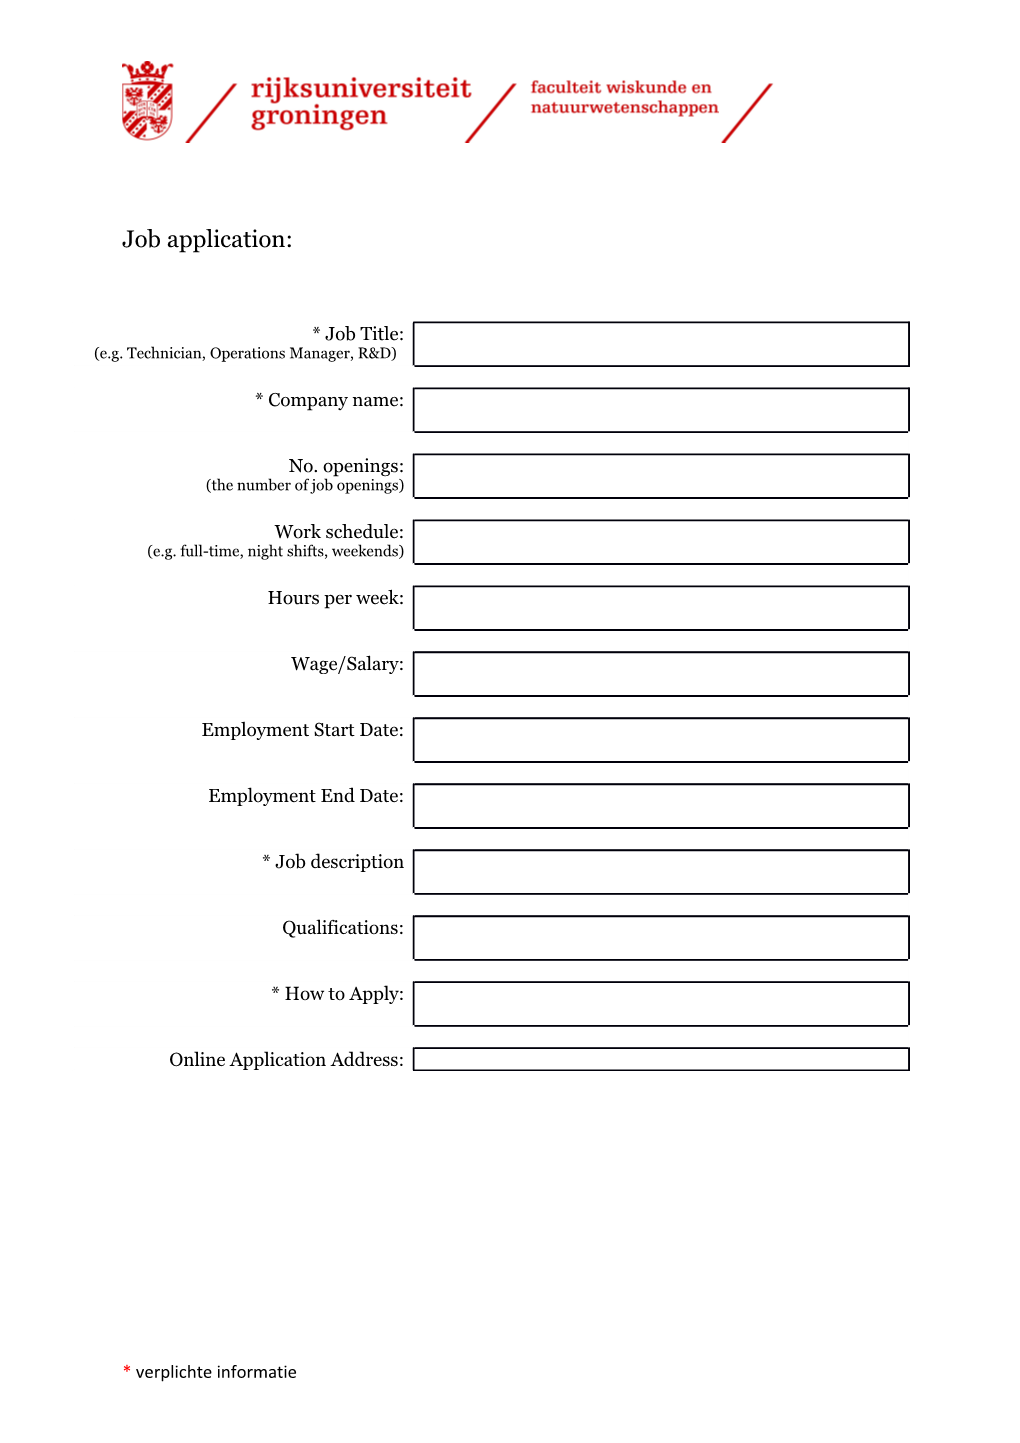 Job Function Option List (More Than One Option Possible)